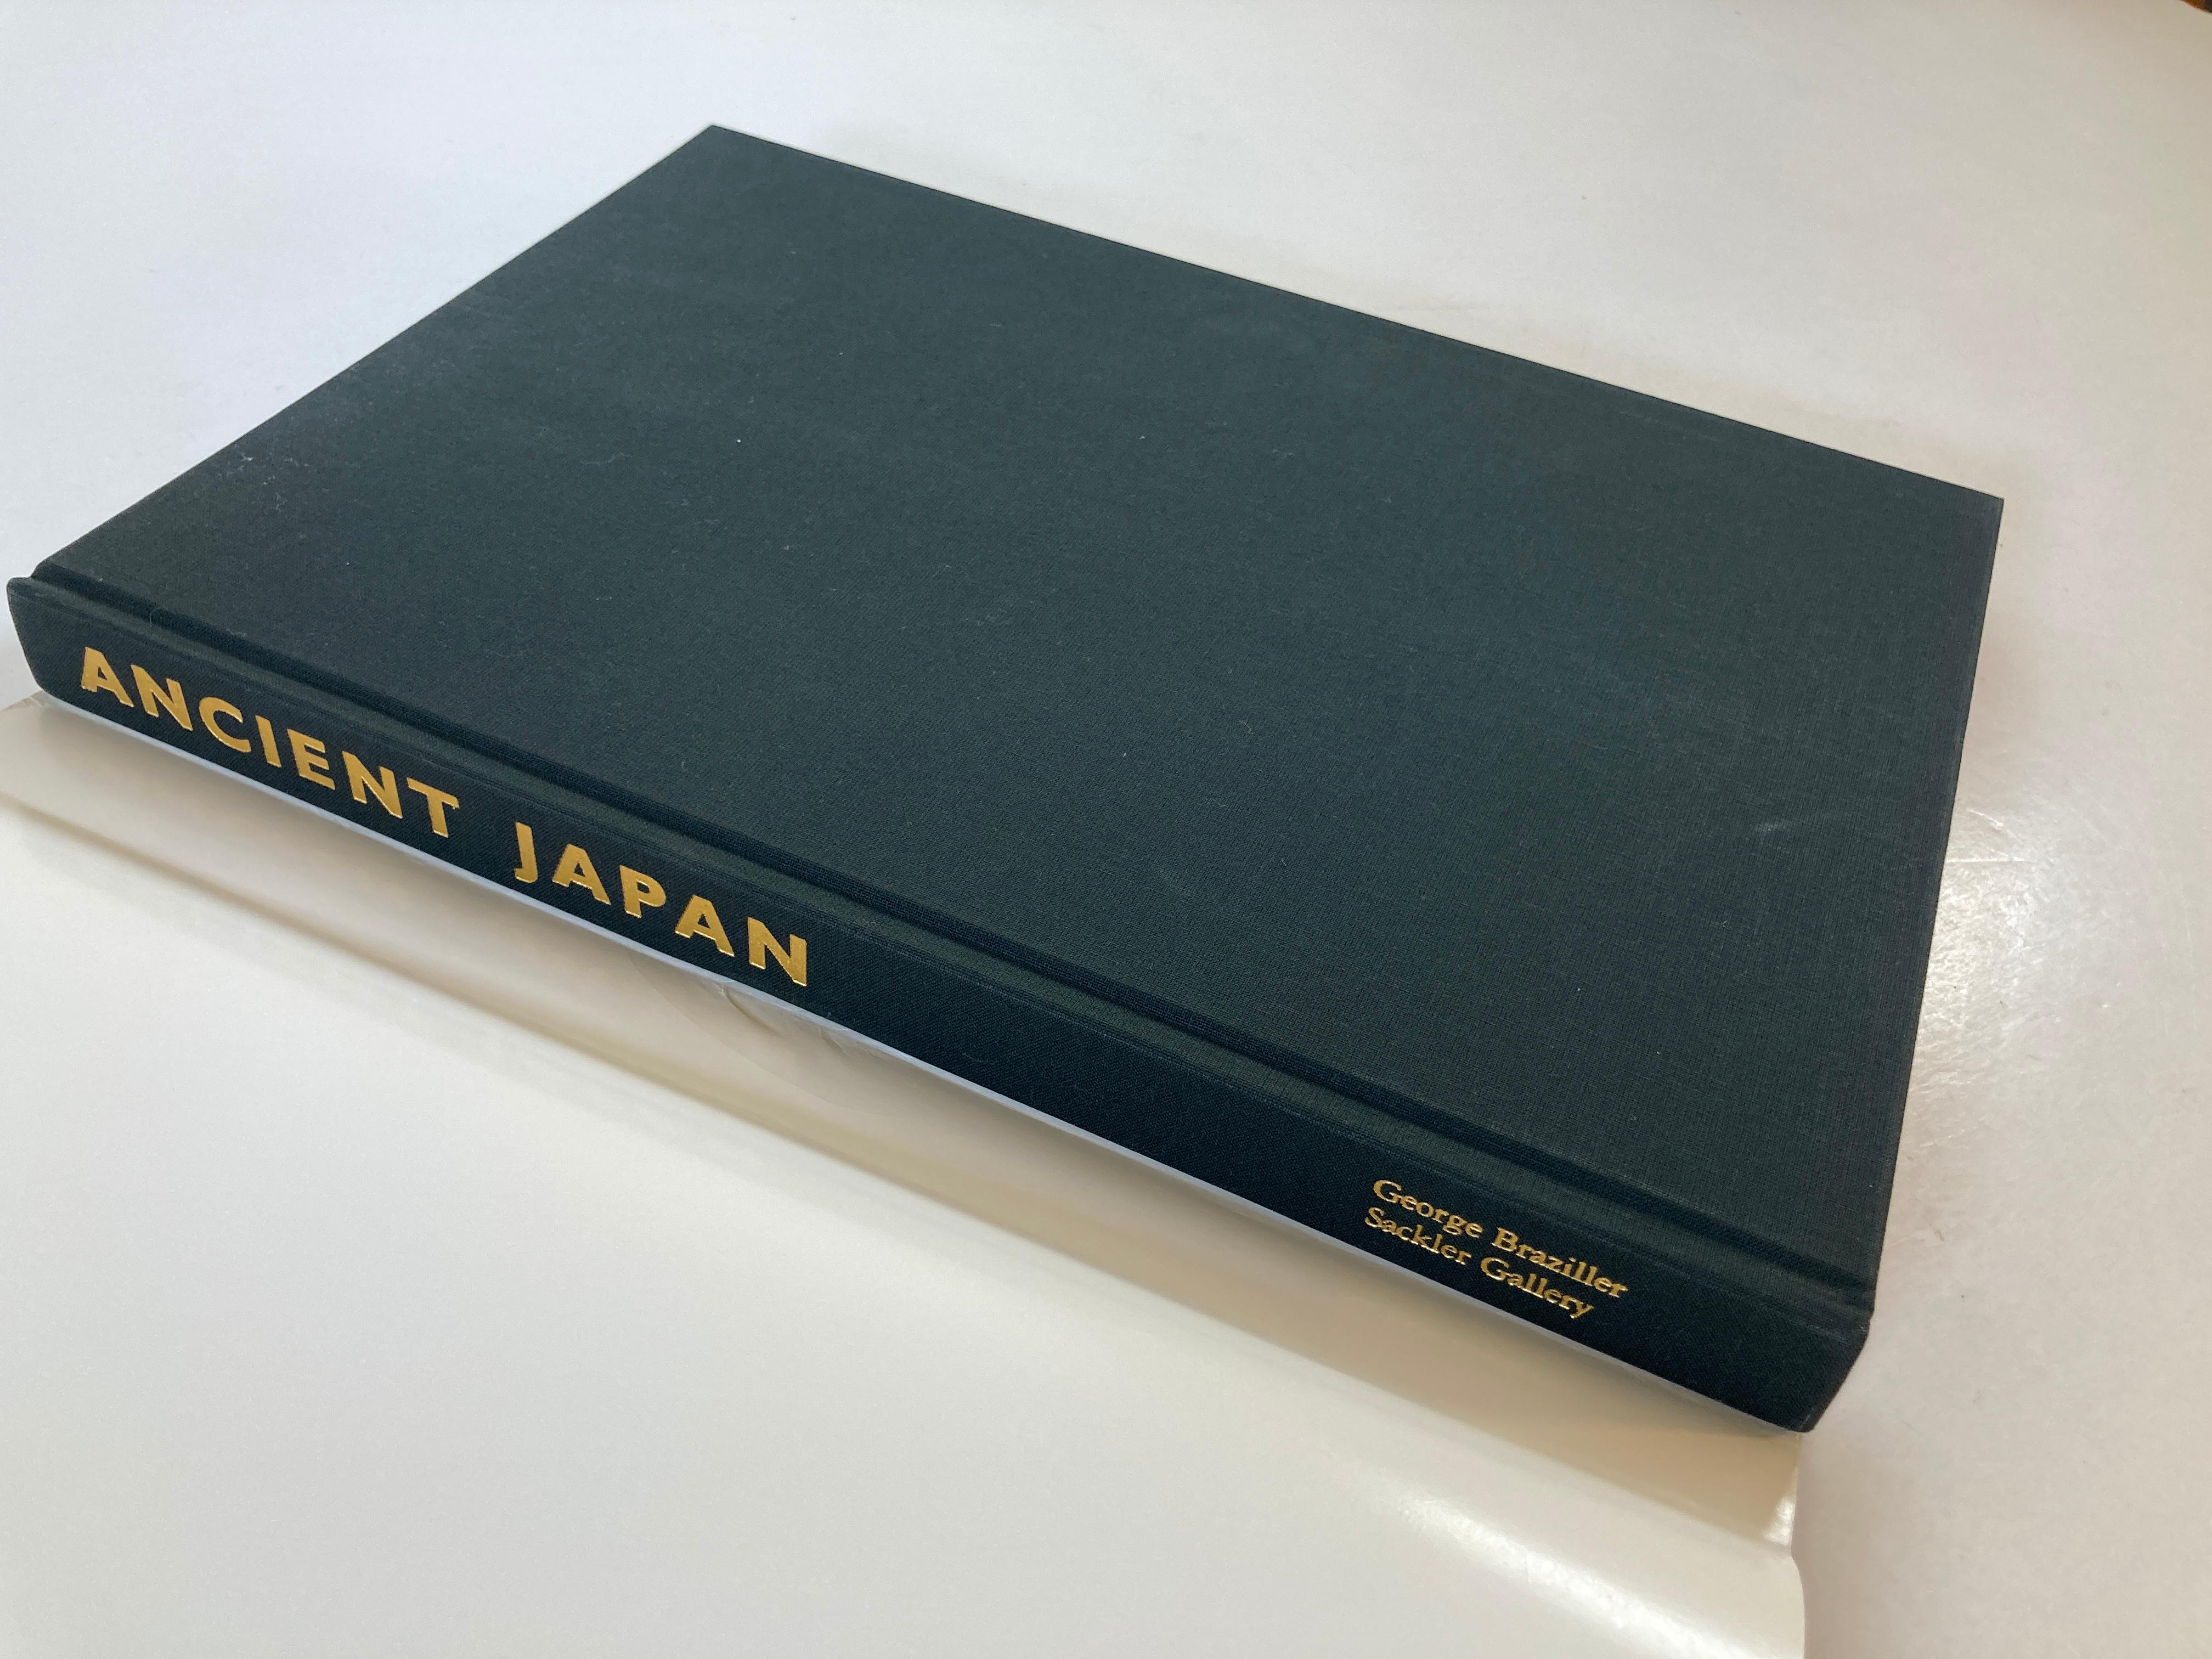 Ancient Japan Hardcover Art Book by Richard J. Pearson In Good Condition For Sale In North Hollywood, CA